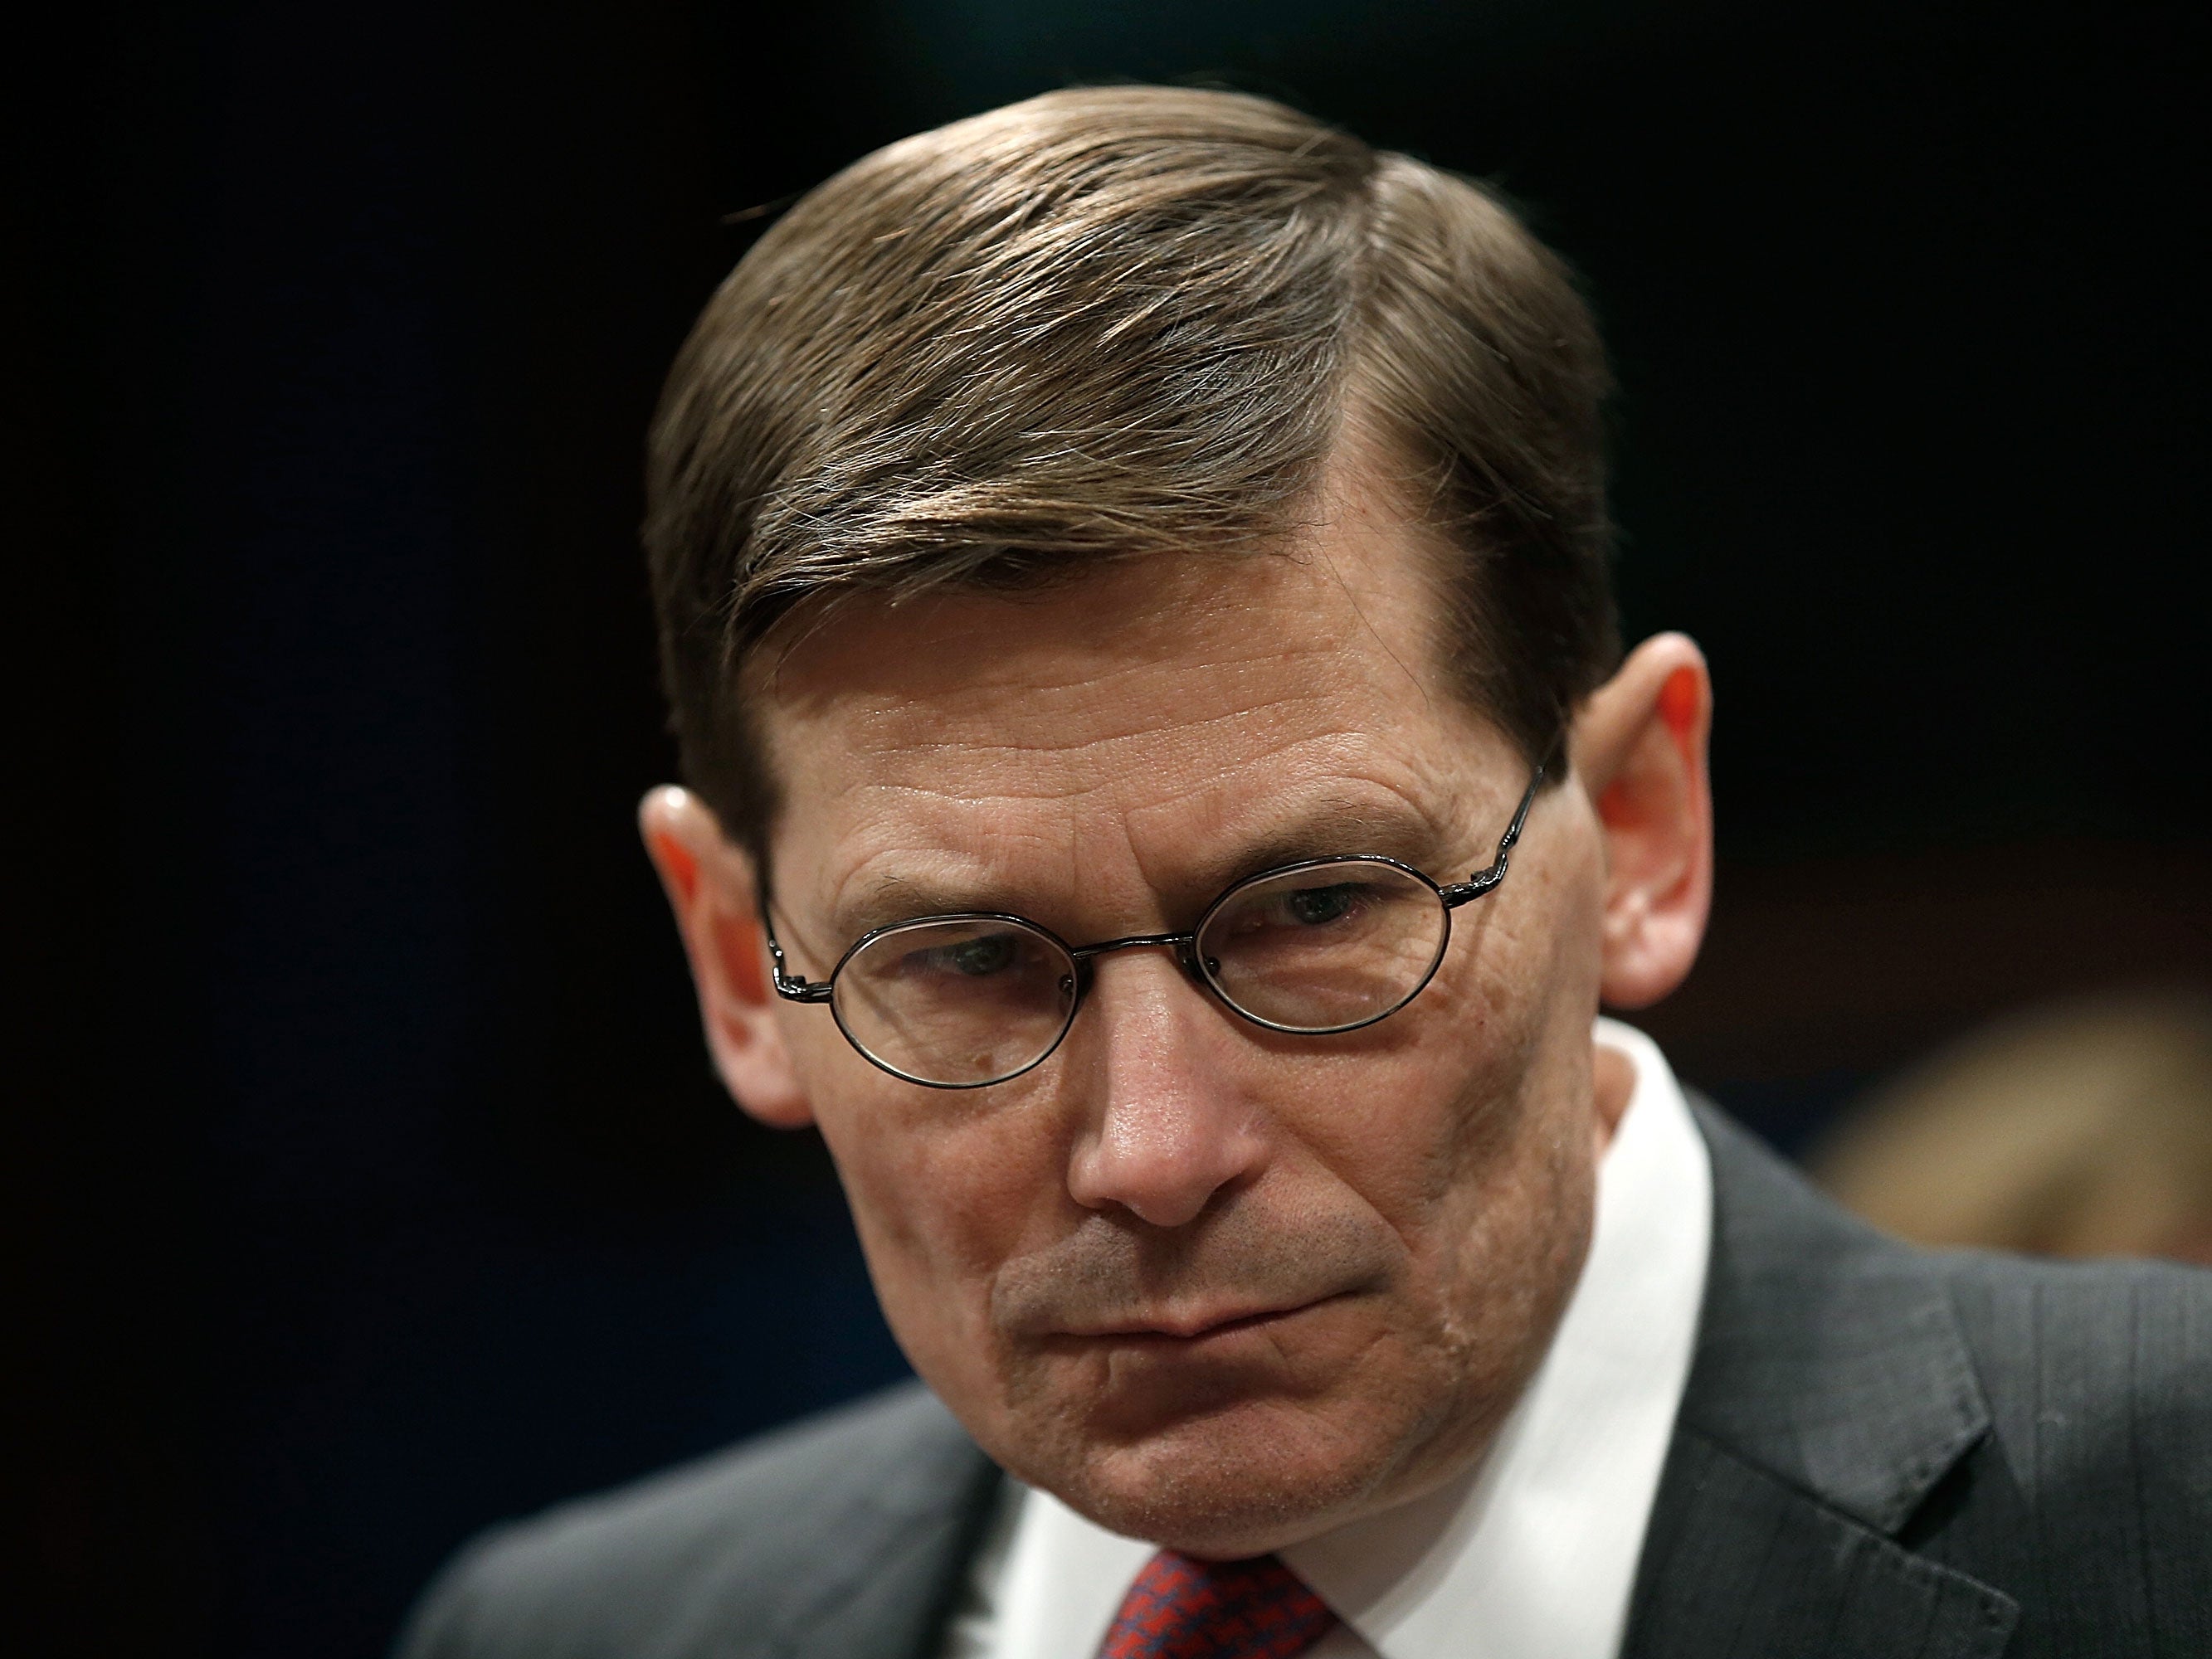 Former Deputy CIA Director Michael Morell outlines the attacks he believes al-Qaeda are capable of